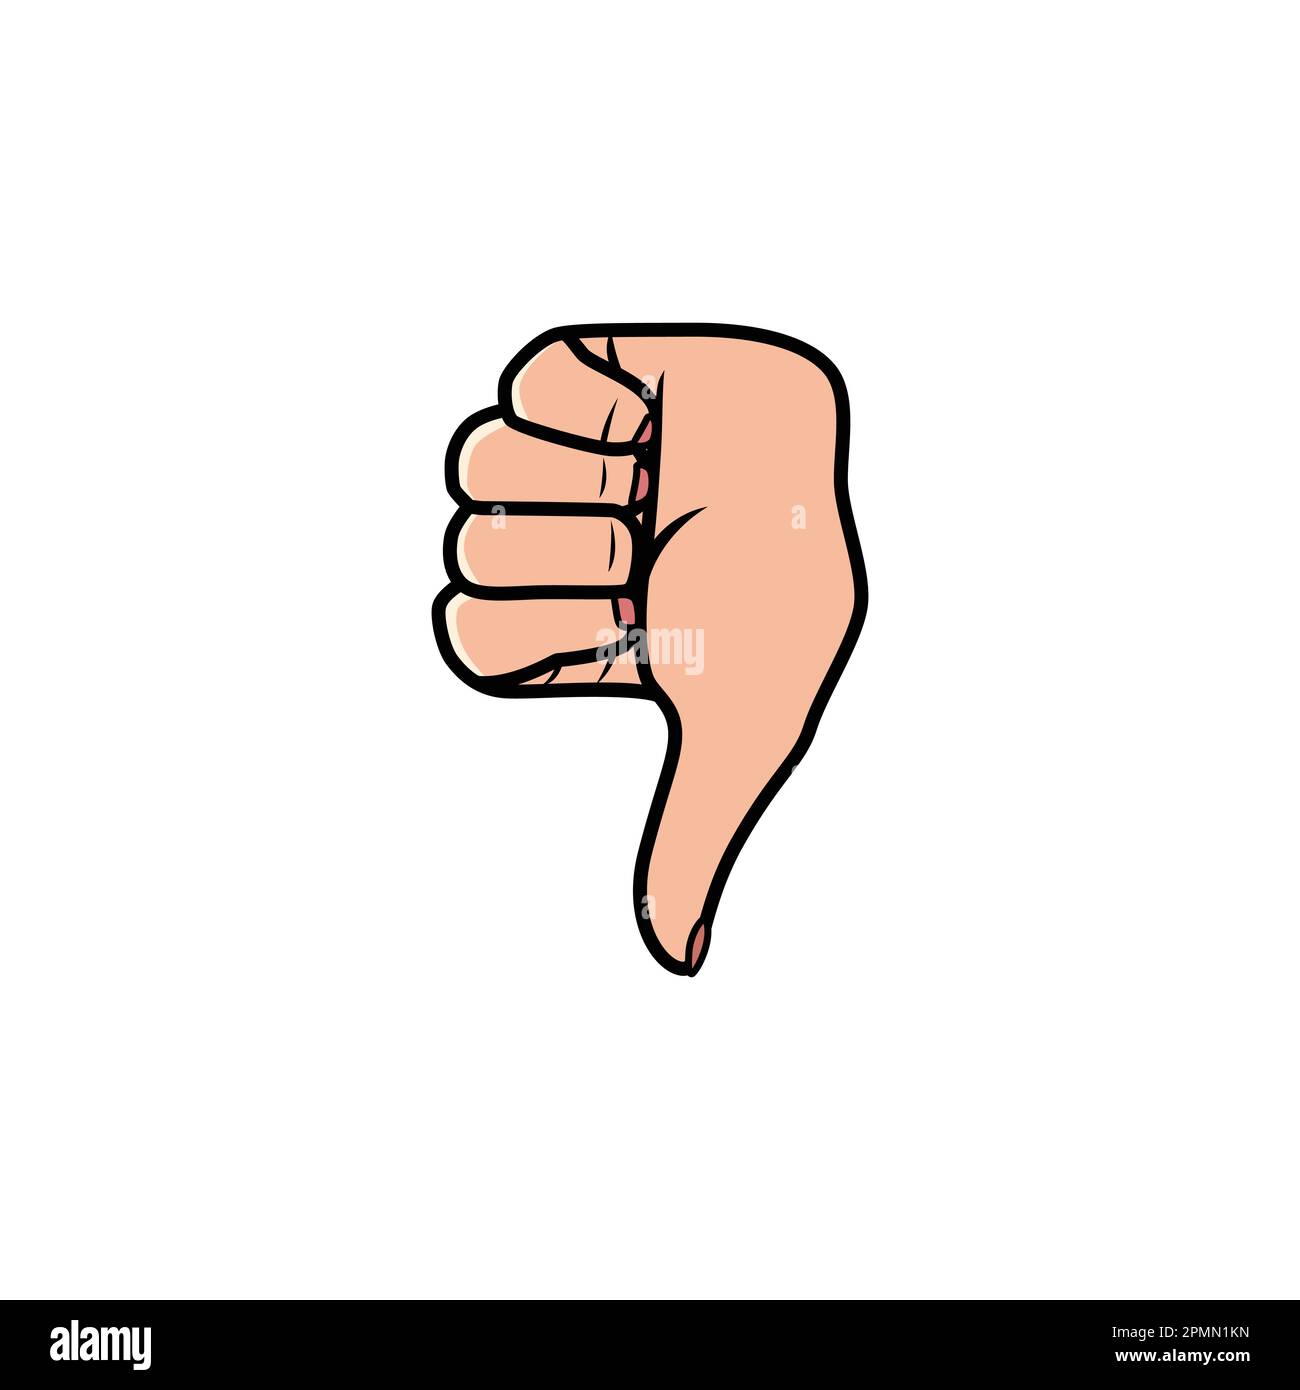 Thumb Down Hand Sign Isolated on a white background. Icon Vector Illustration. Stock Vector